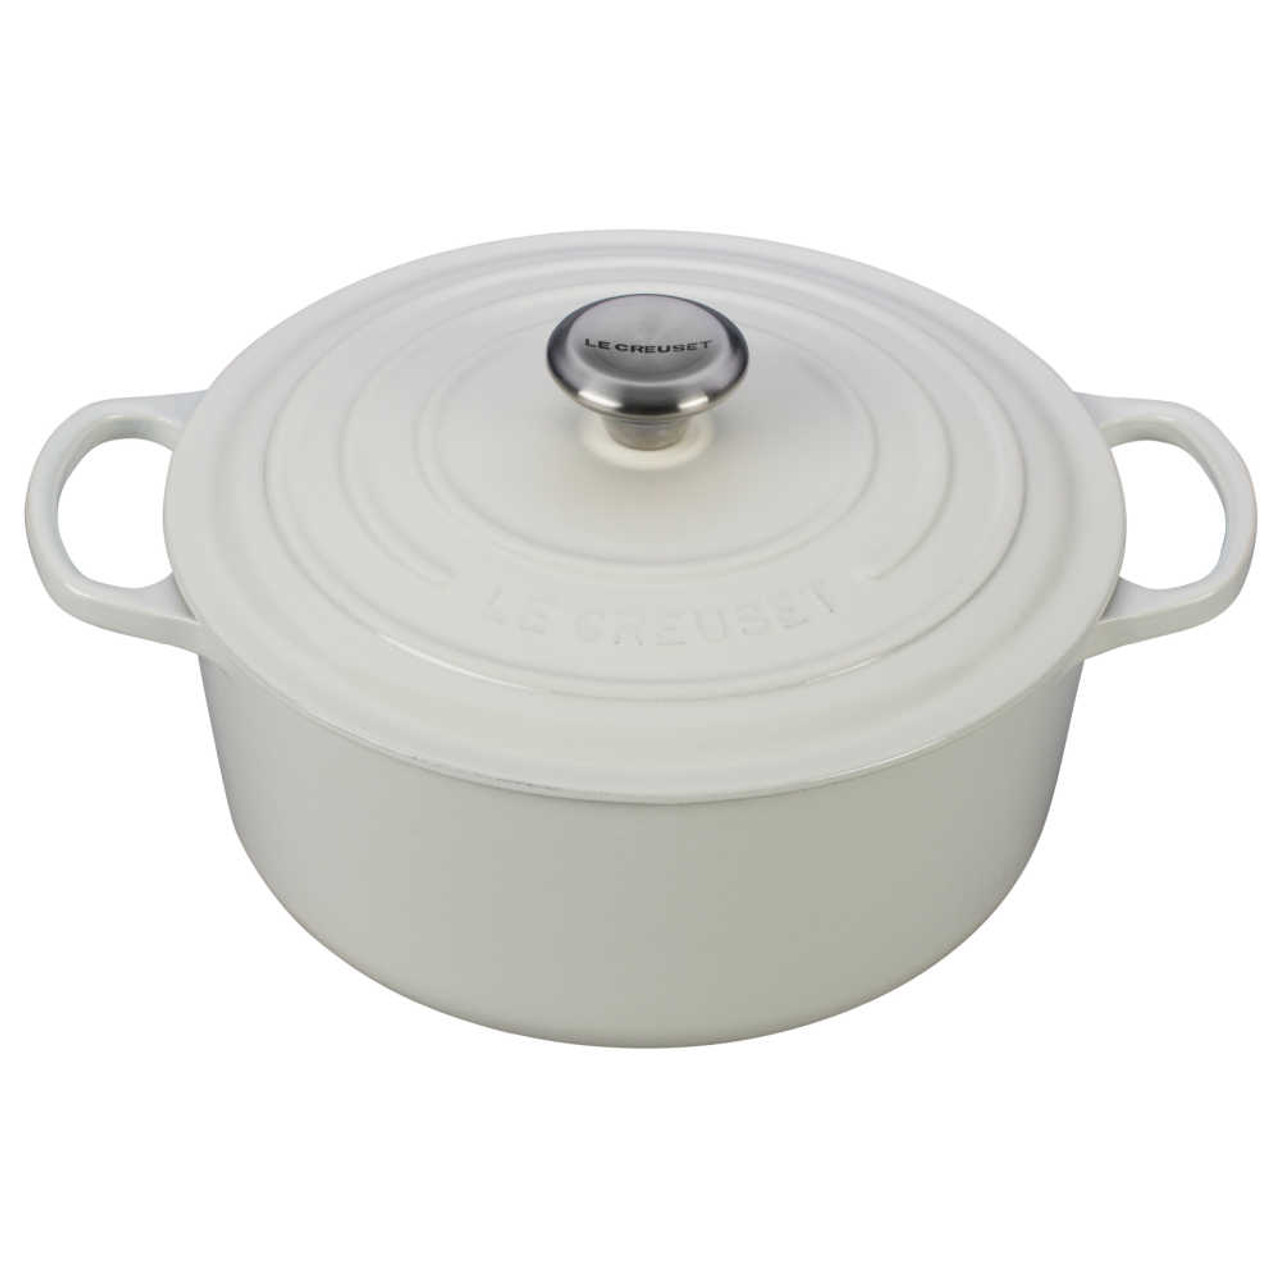 https://cdn11.bigcommerce.com/s-hccytny0od/images/stencil/1280x1280/products/1796/17601/Le_Creuset_Round_Dutch_Oven_White__57617.1639879666.jpg?c=2?imbypass=on